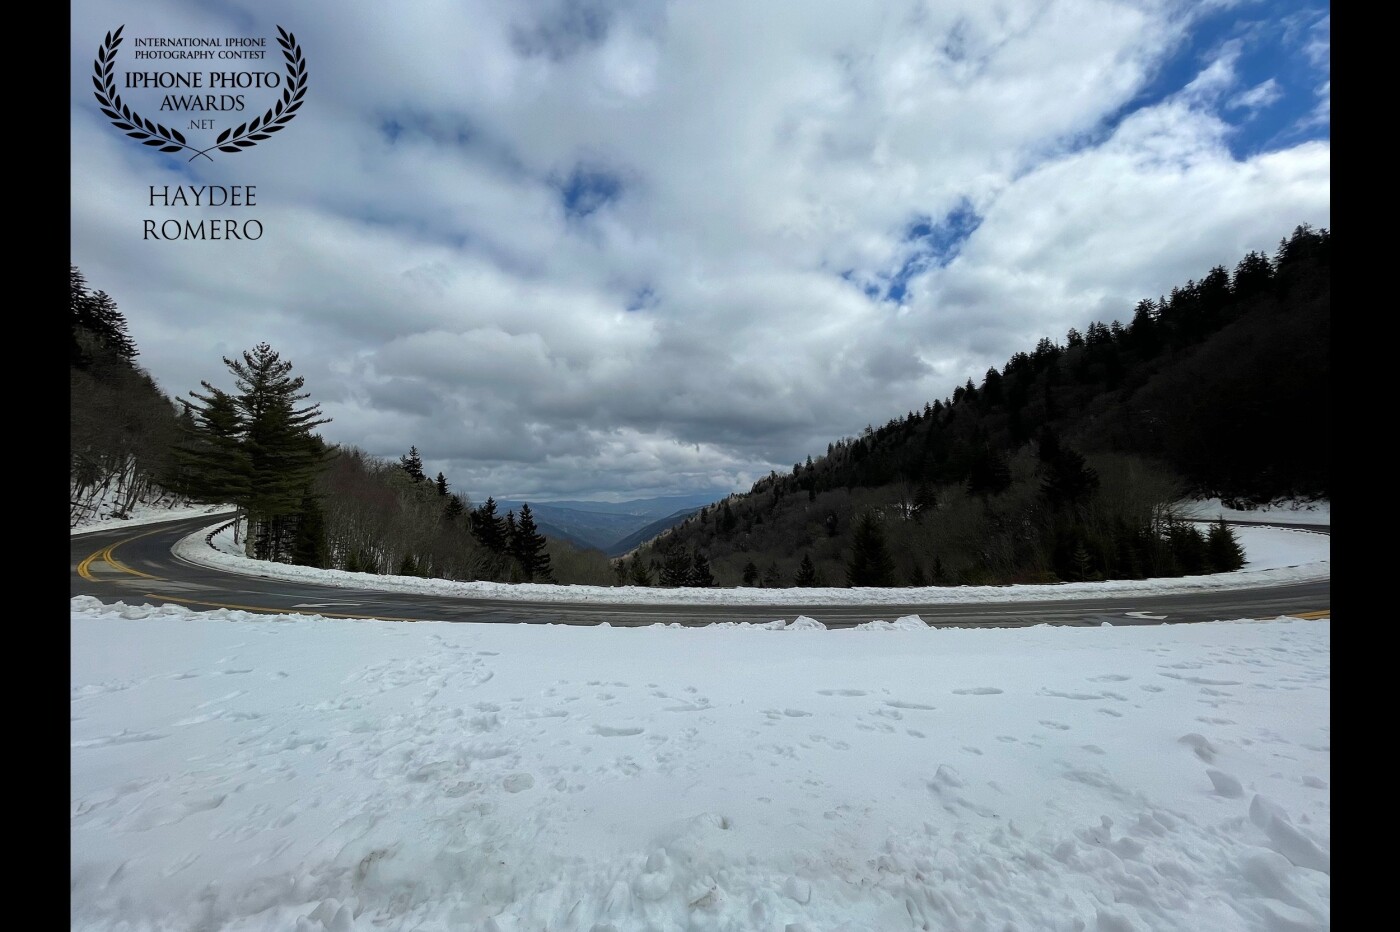 This picture was taken on a cold February day high up in the Great Smoky Mountains National Park, where a graceful curve in the road frames the puffy clouds in the bright blue sky and the mountains beyond, and the bumps and tufts of piled up snow on the ground.